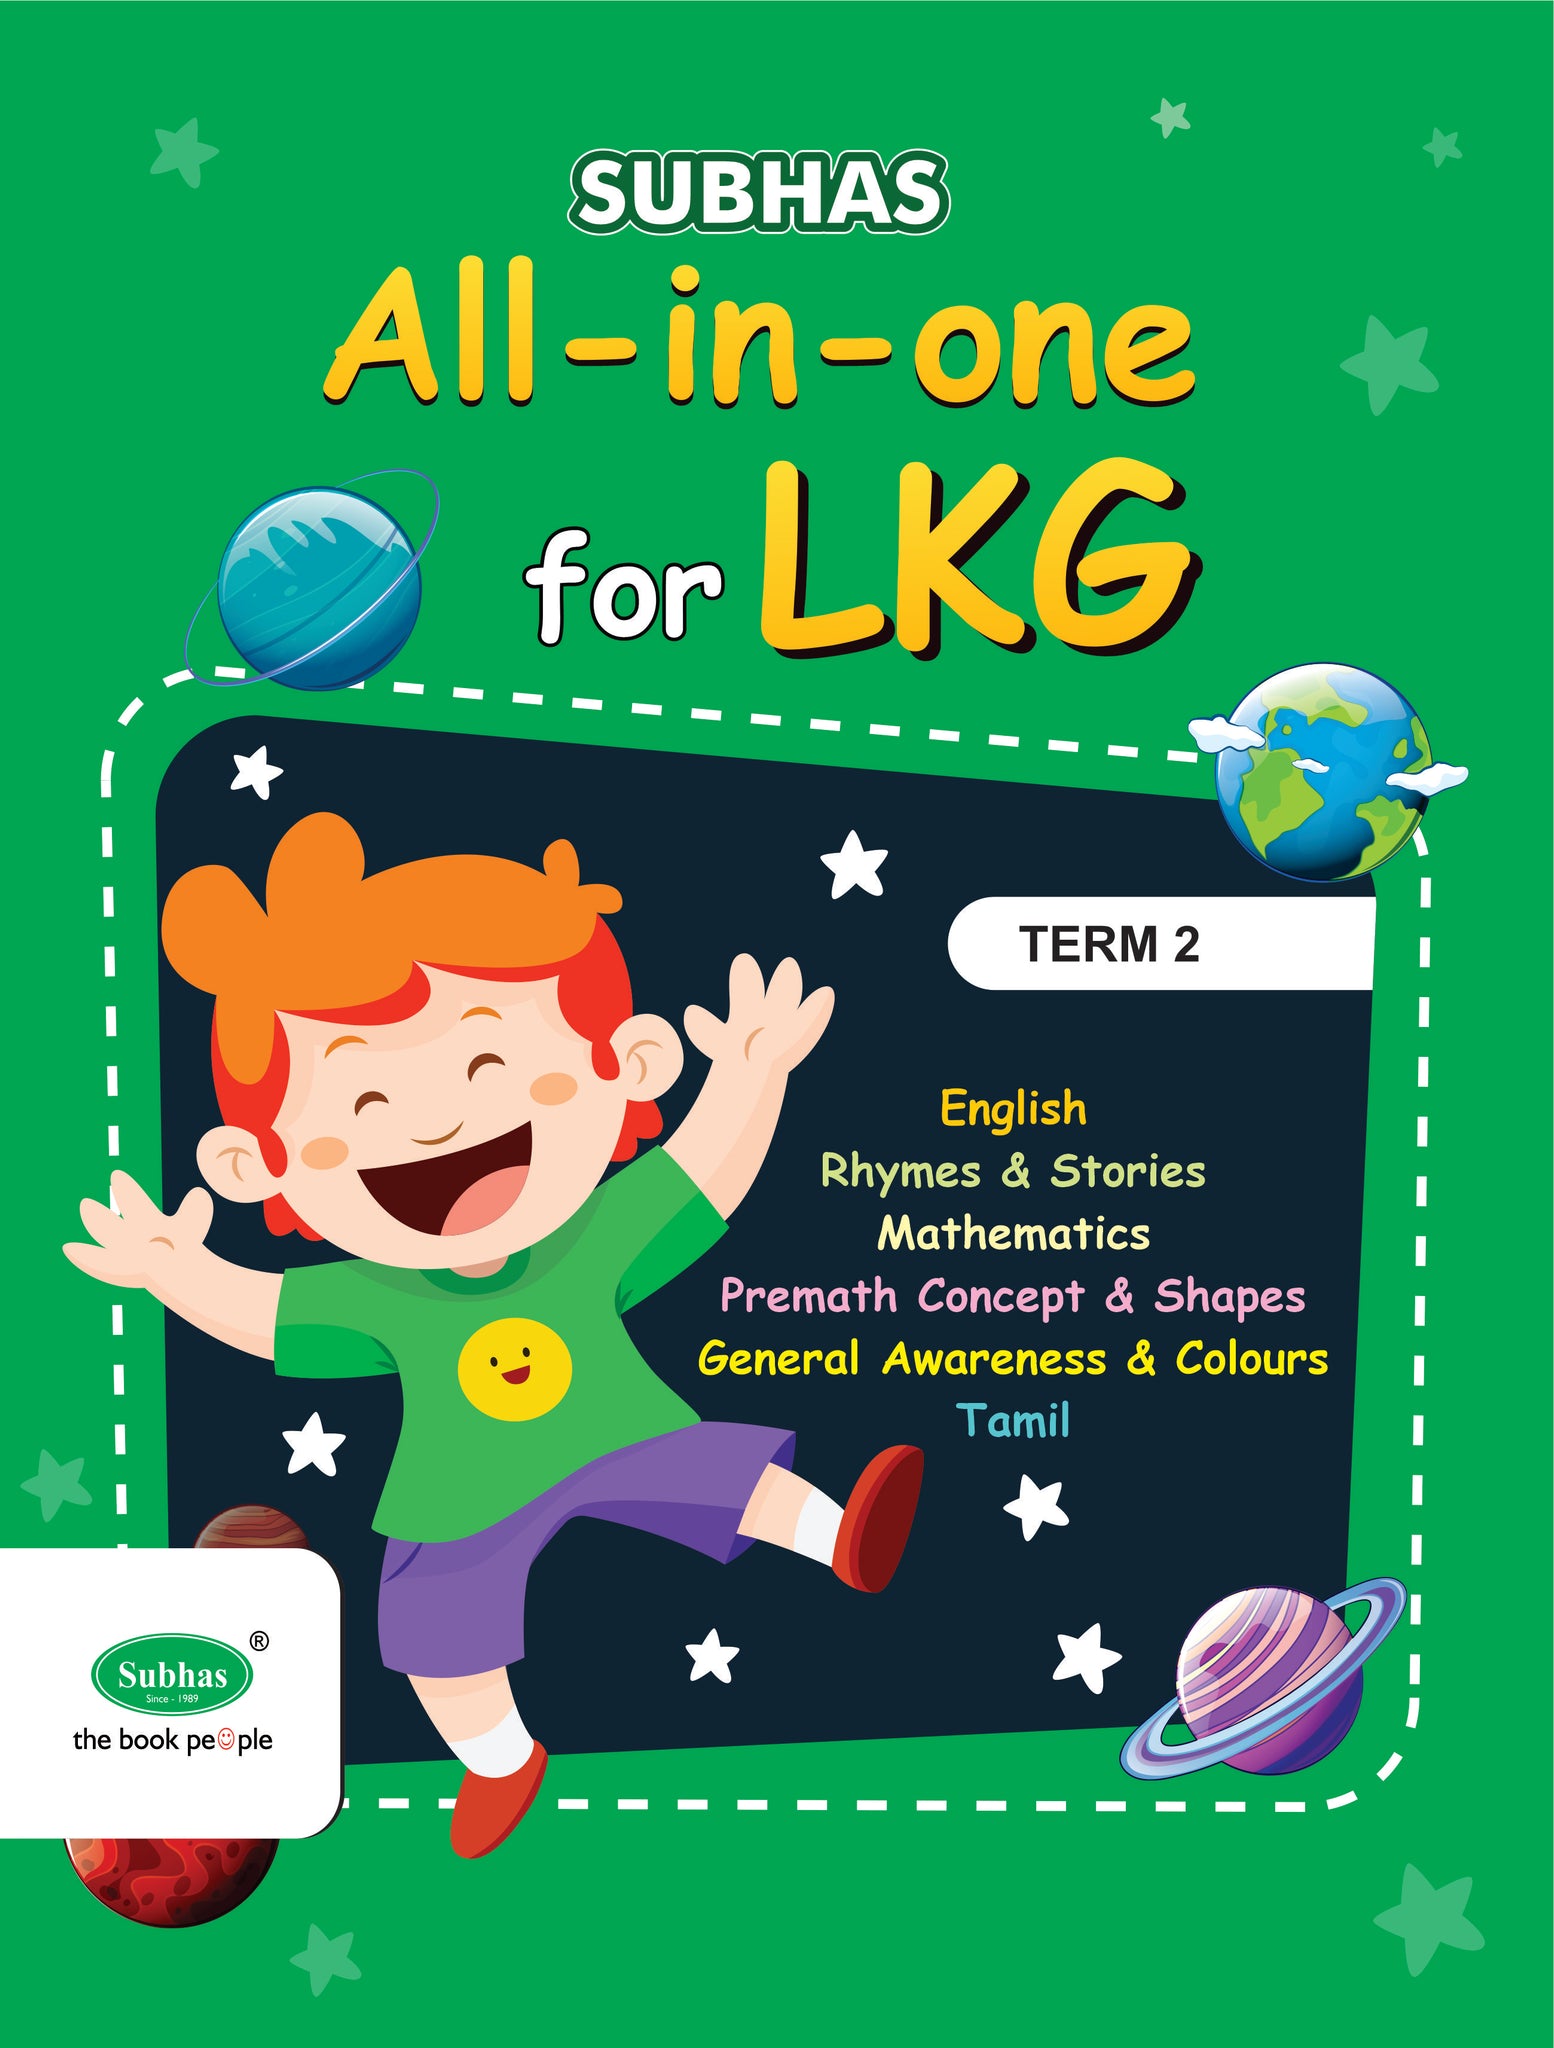 Subhas All in One LKG for Term 2